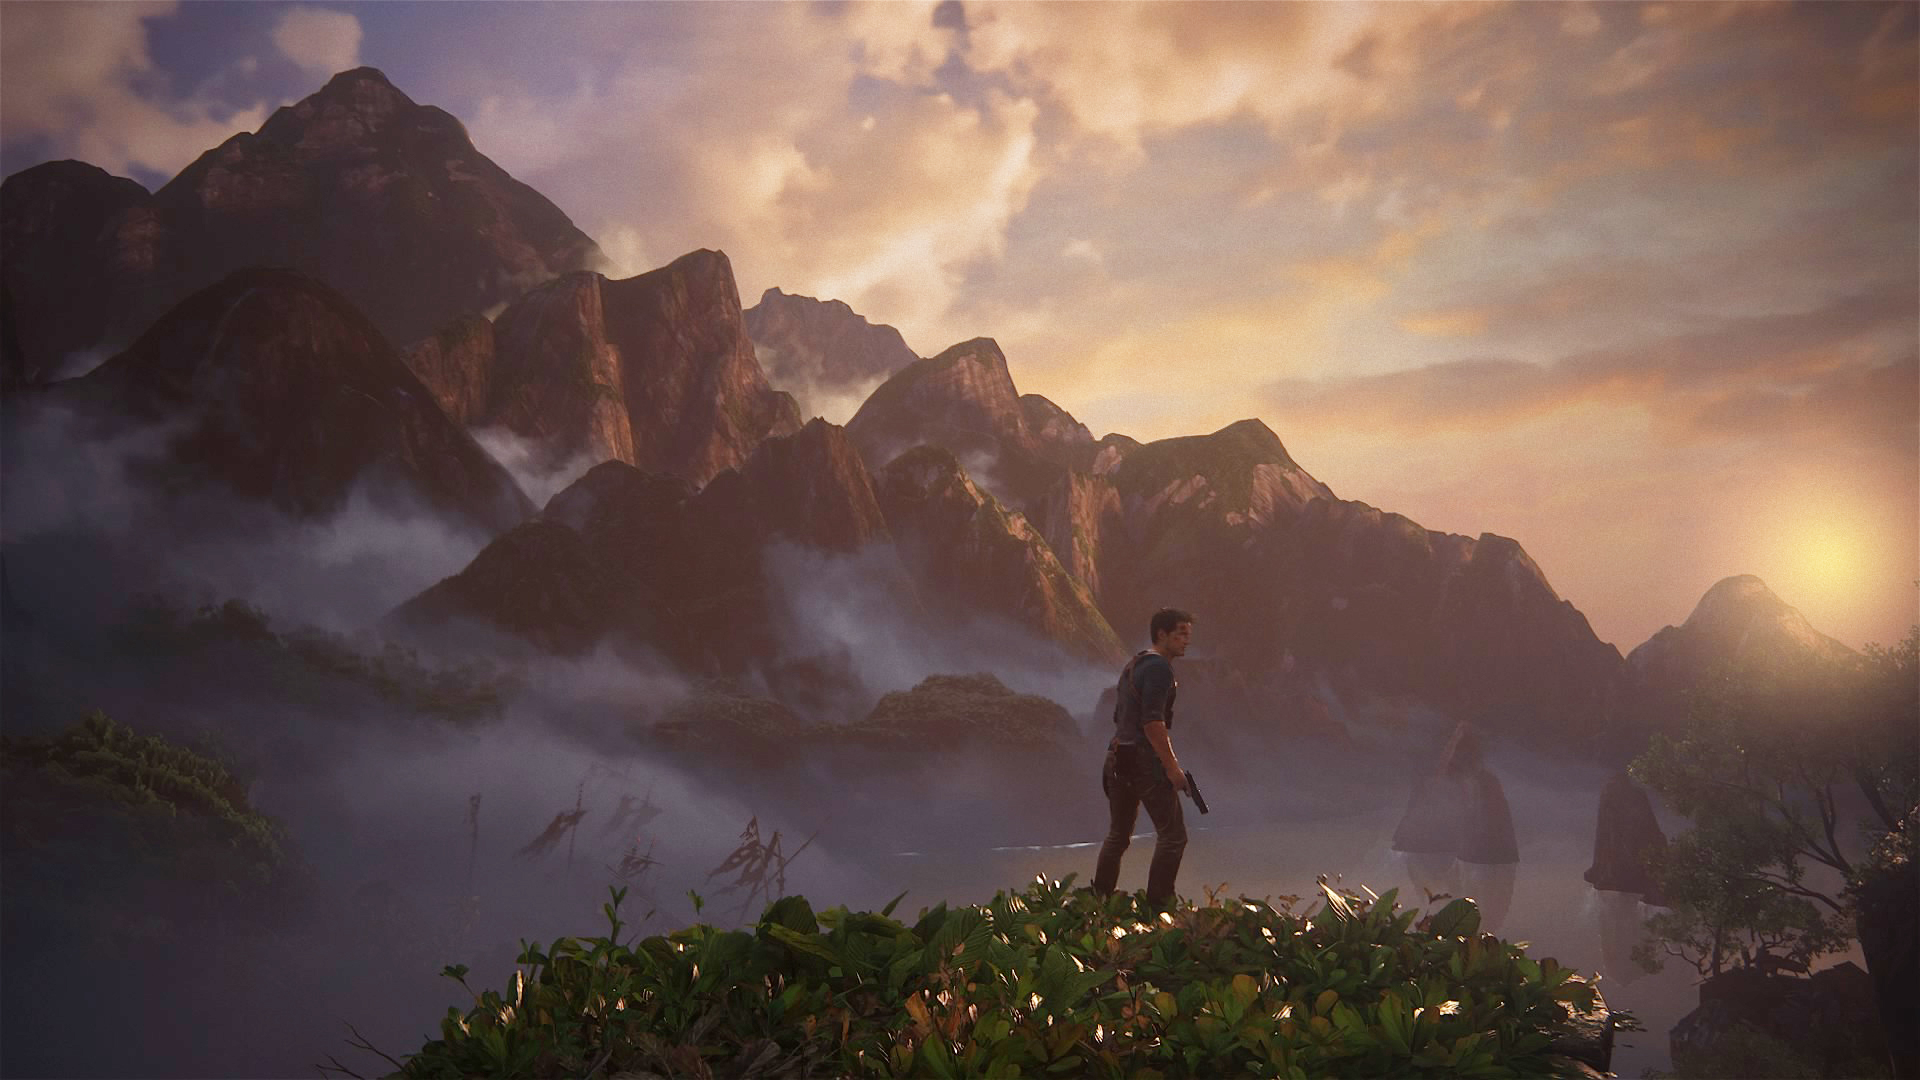 Pro Photographer’s Uncharted 4 Screenshots Are Fantastic